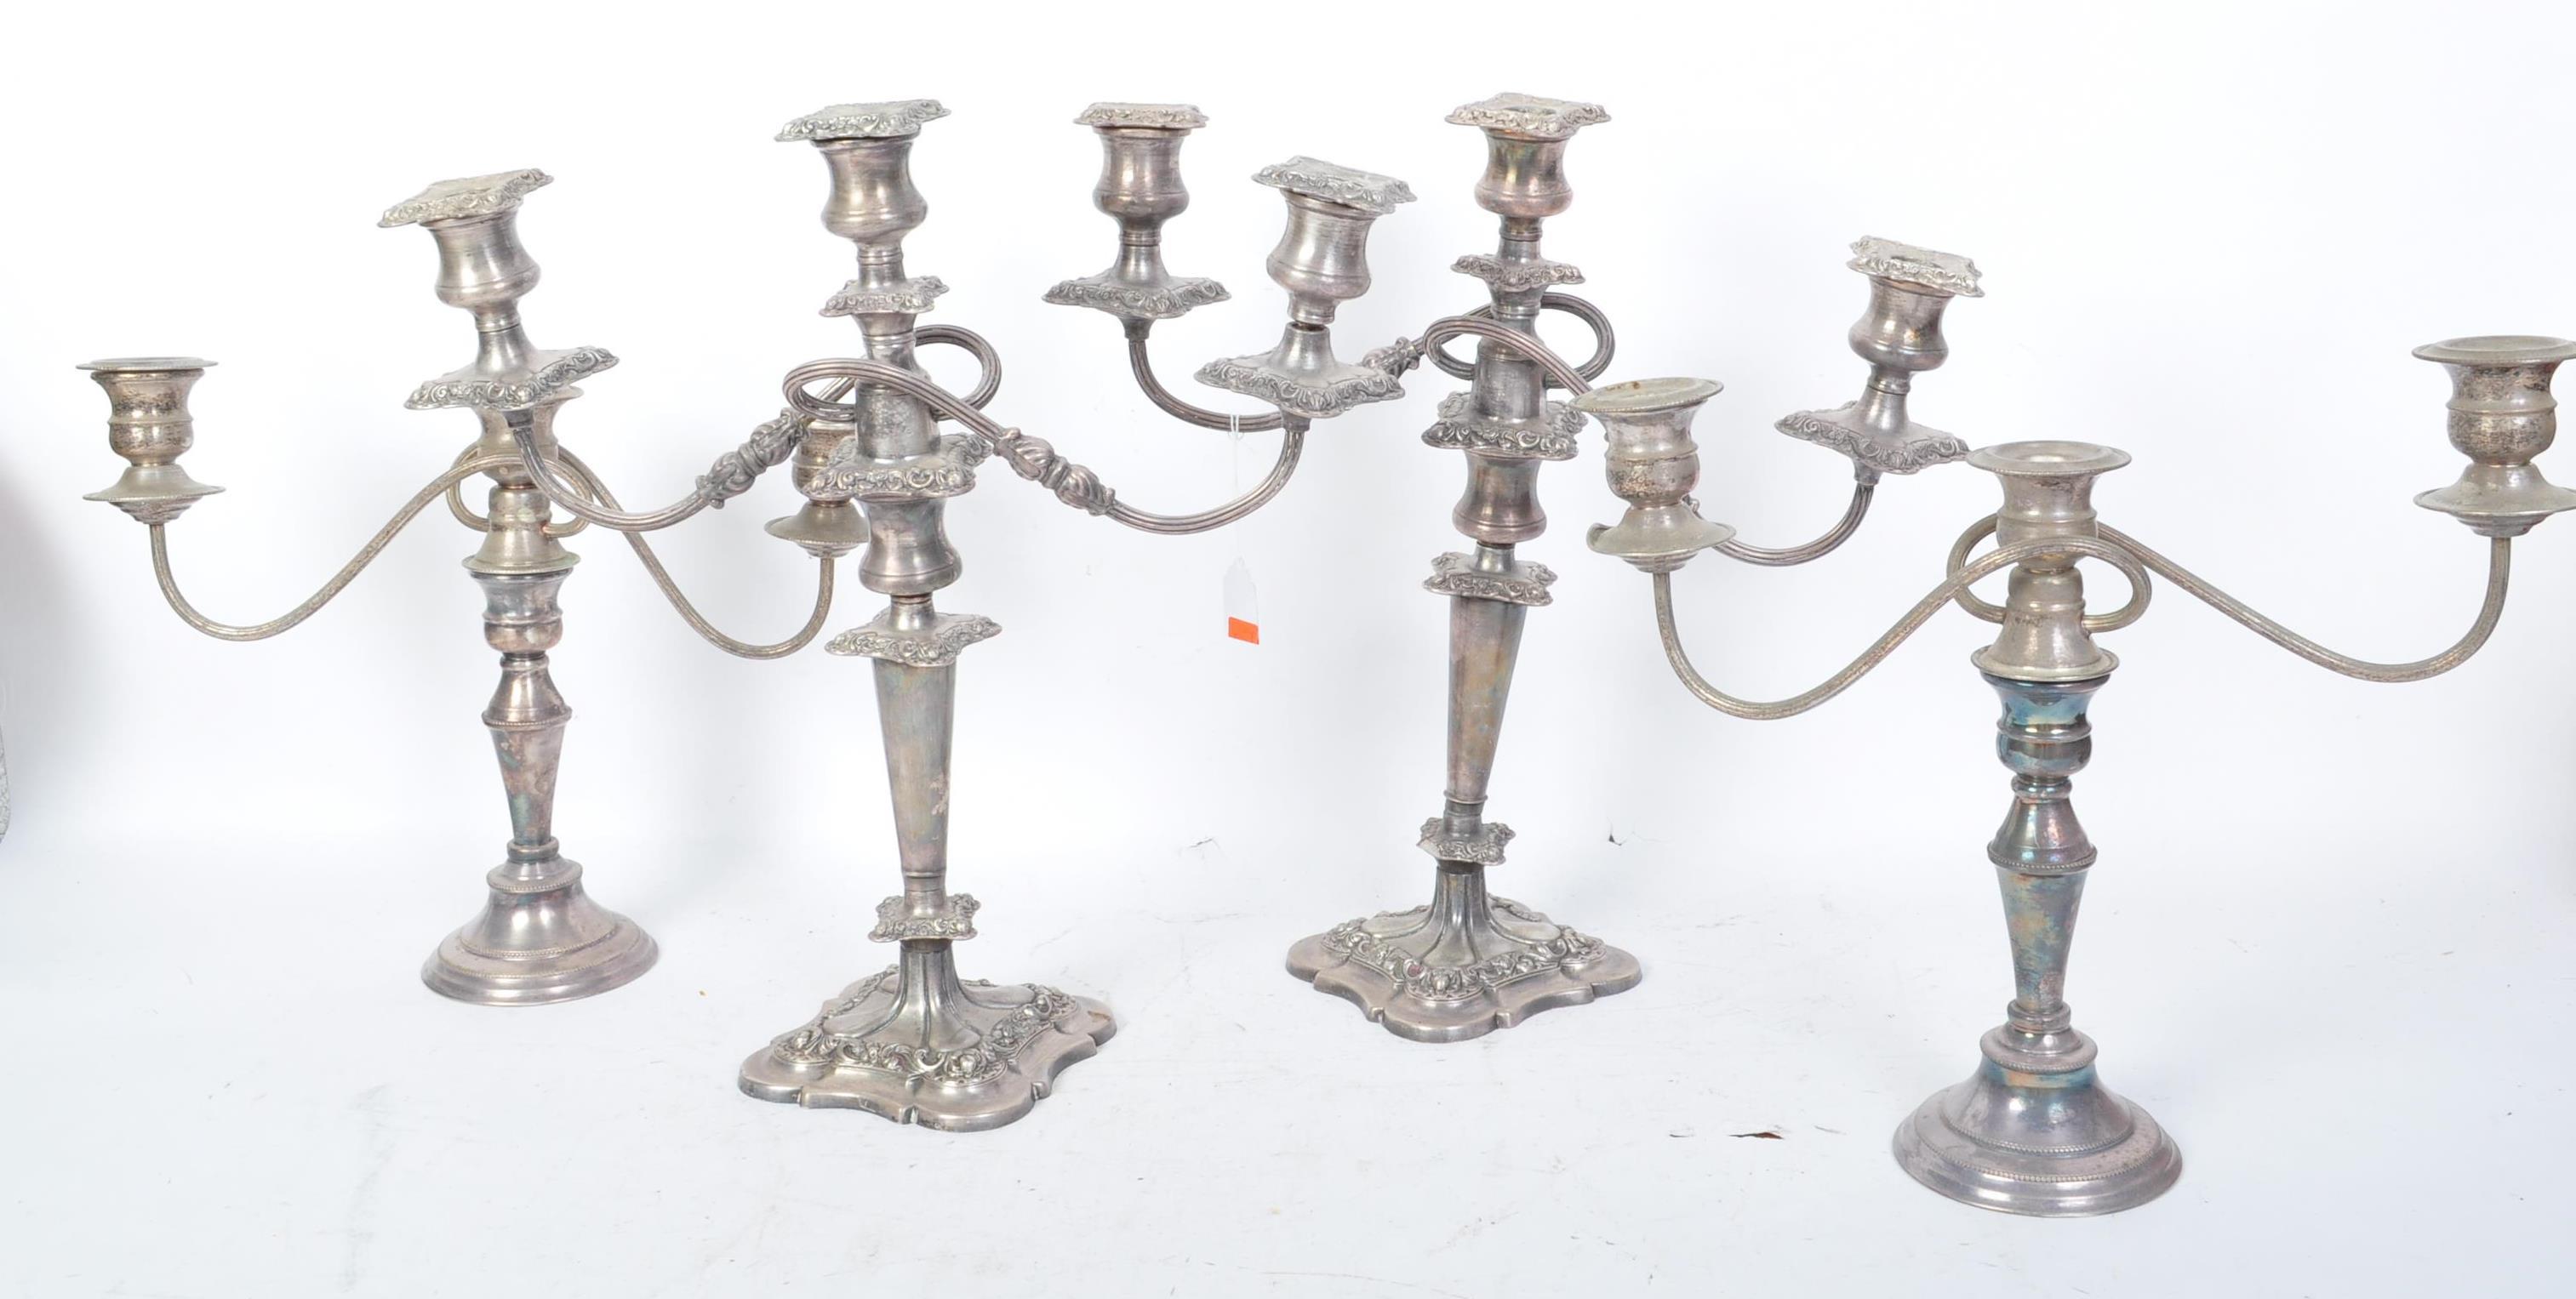 TWO PAIRS OF EARLY 20TH CENTURY SILVER PLATED CANDELABRA